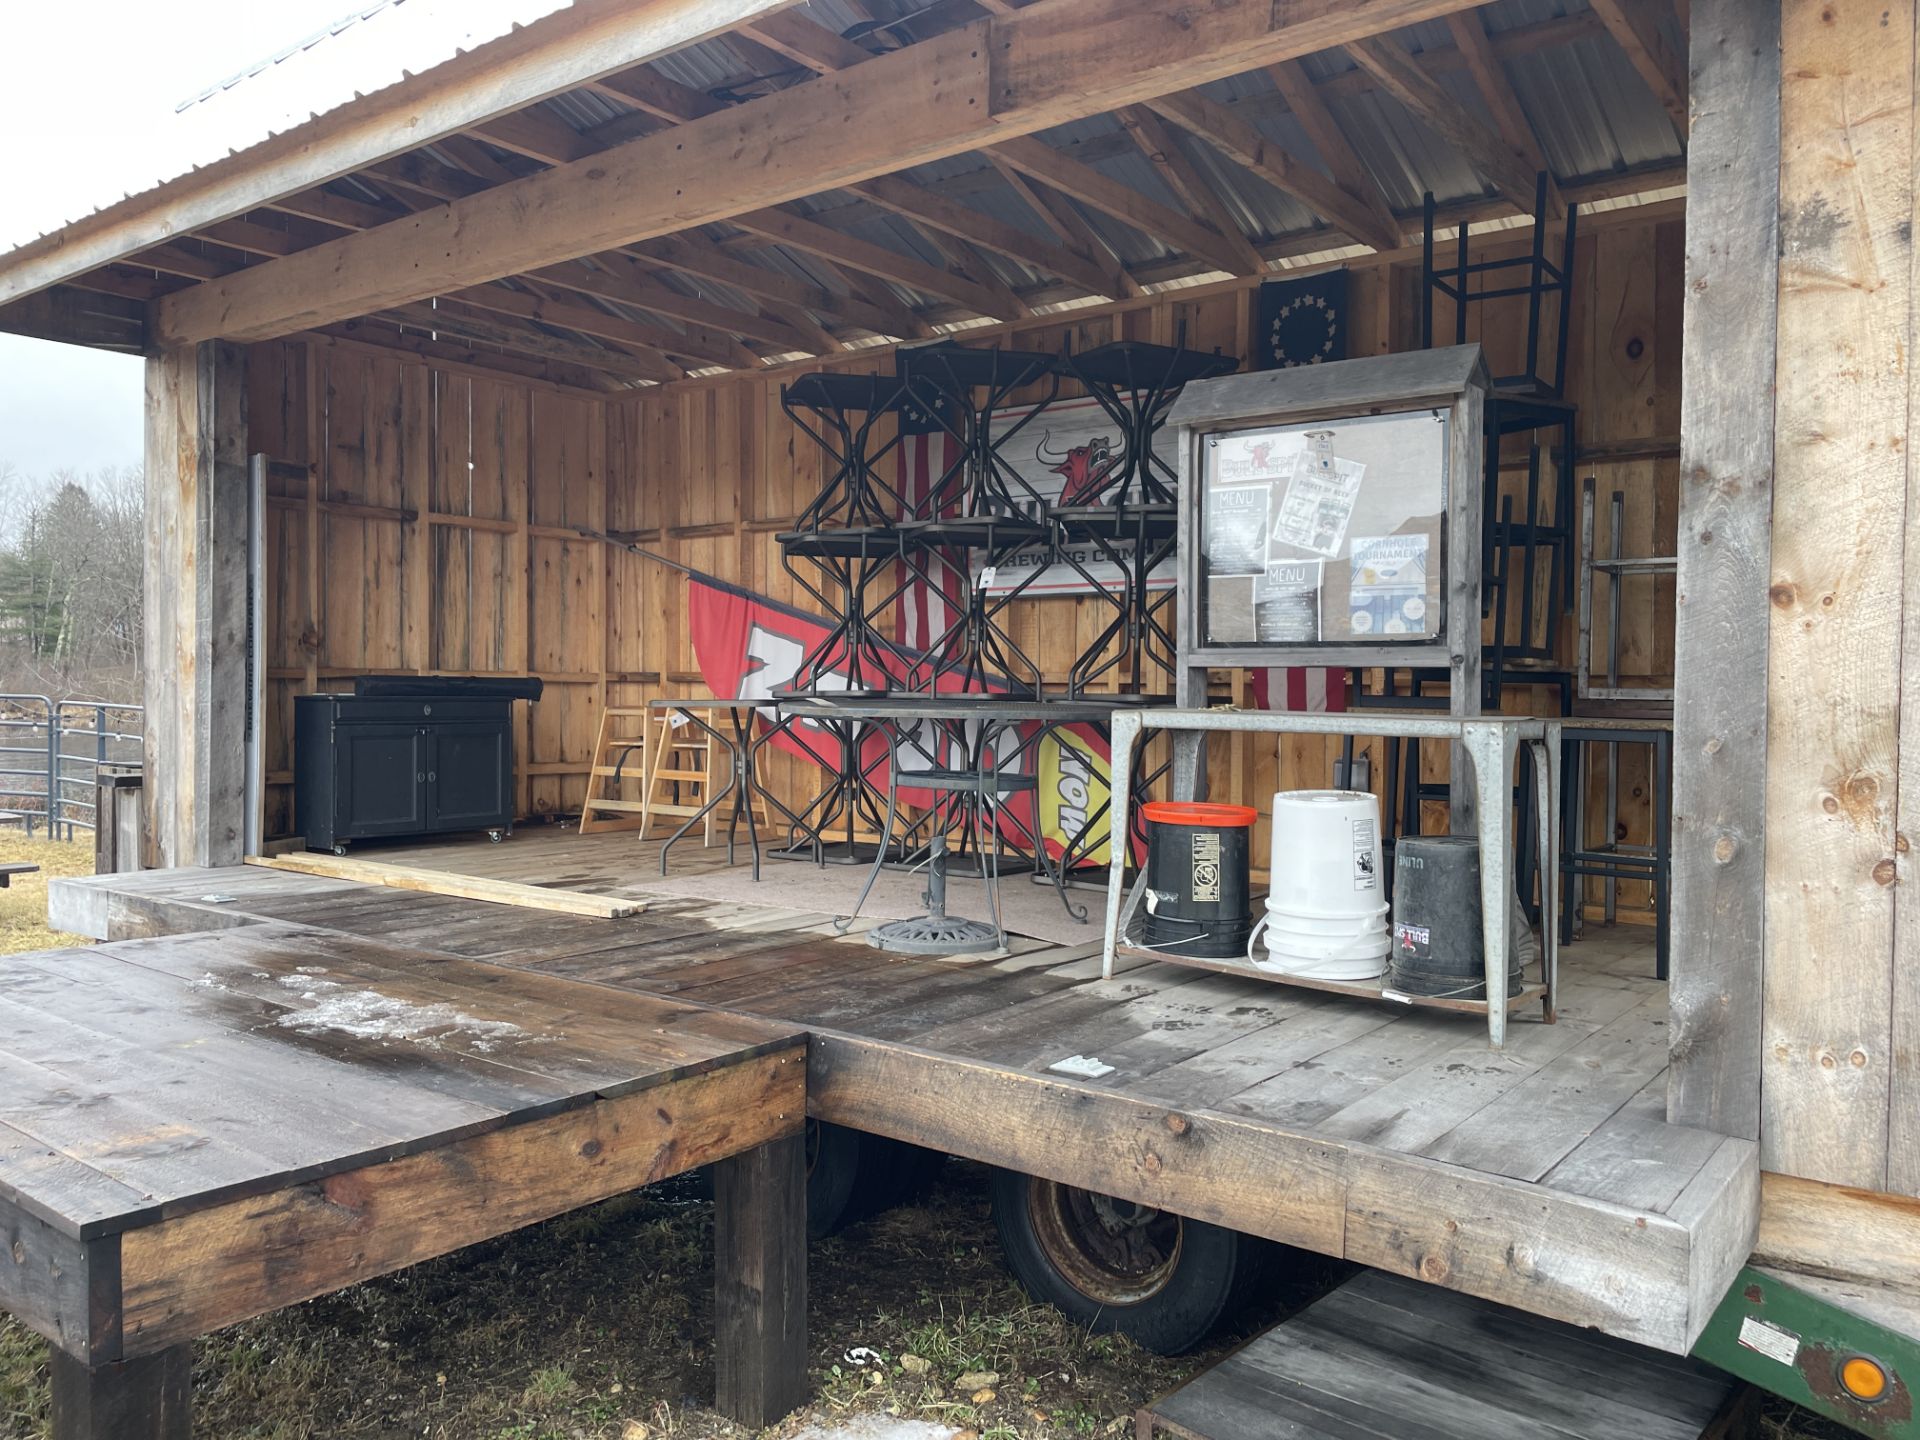 (SEE DESCIPTION) Rogers Custom Trailer/Band Music Stage - Rogers 2 Axle 8 Wheel Wood Deck Trailer w/ - Image 5 of 12